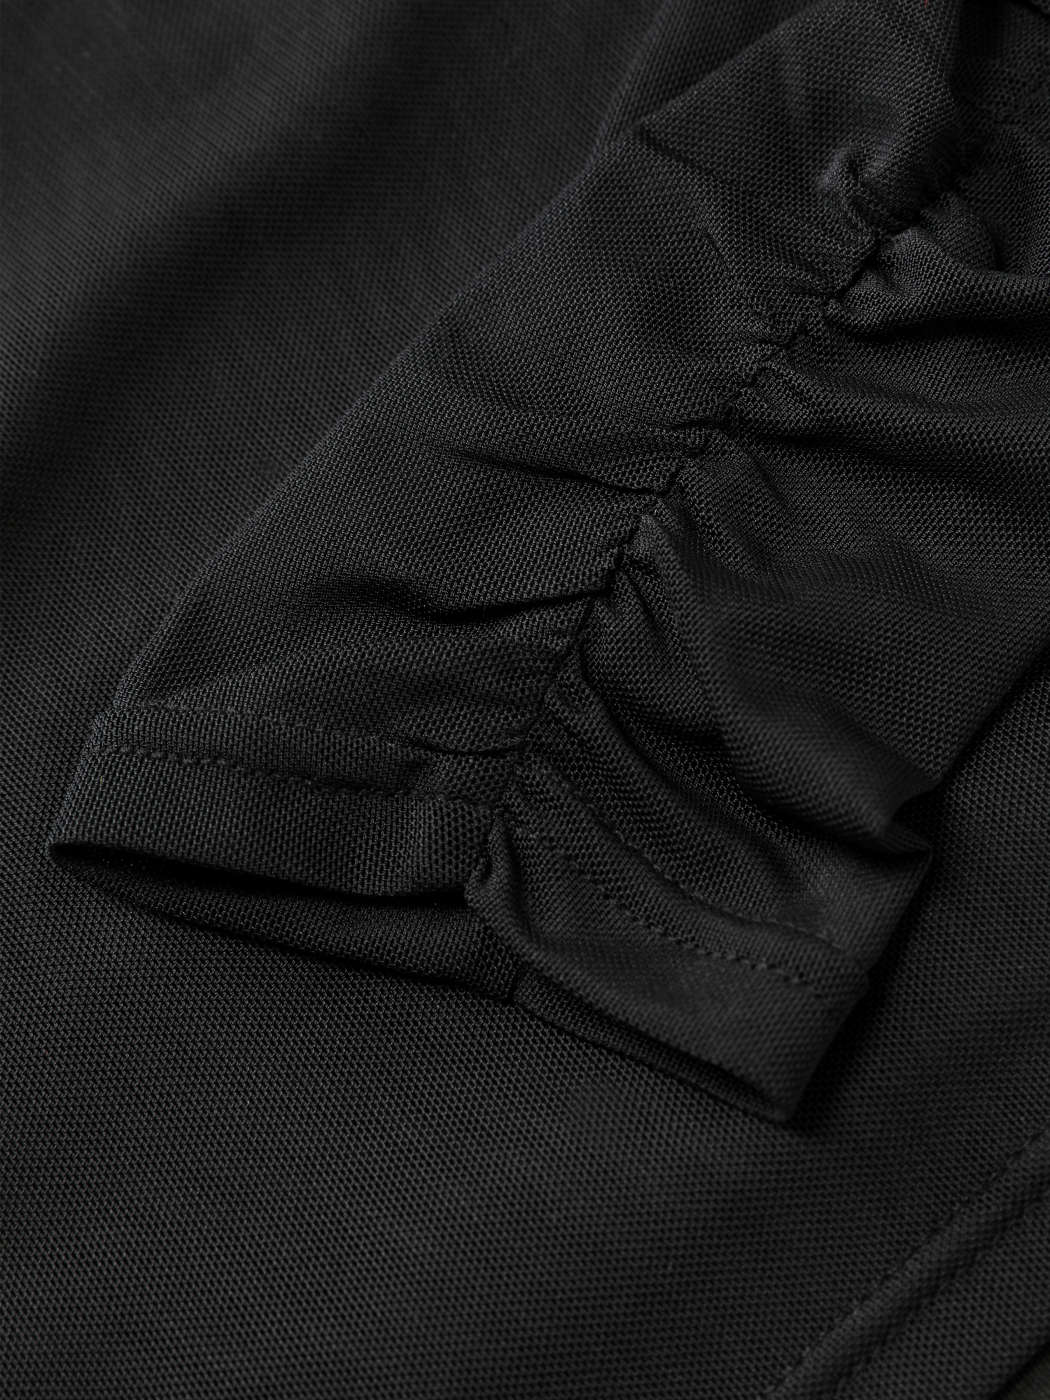 Hollow Out Voile Top details